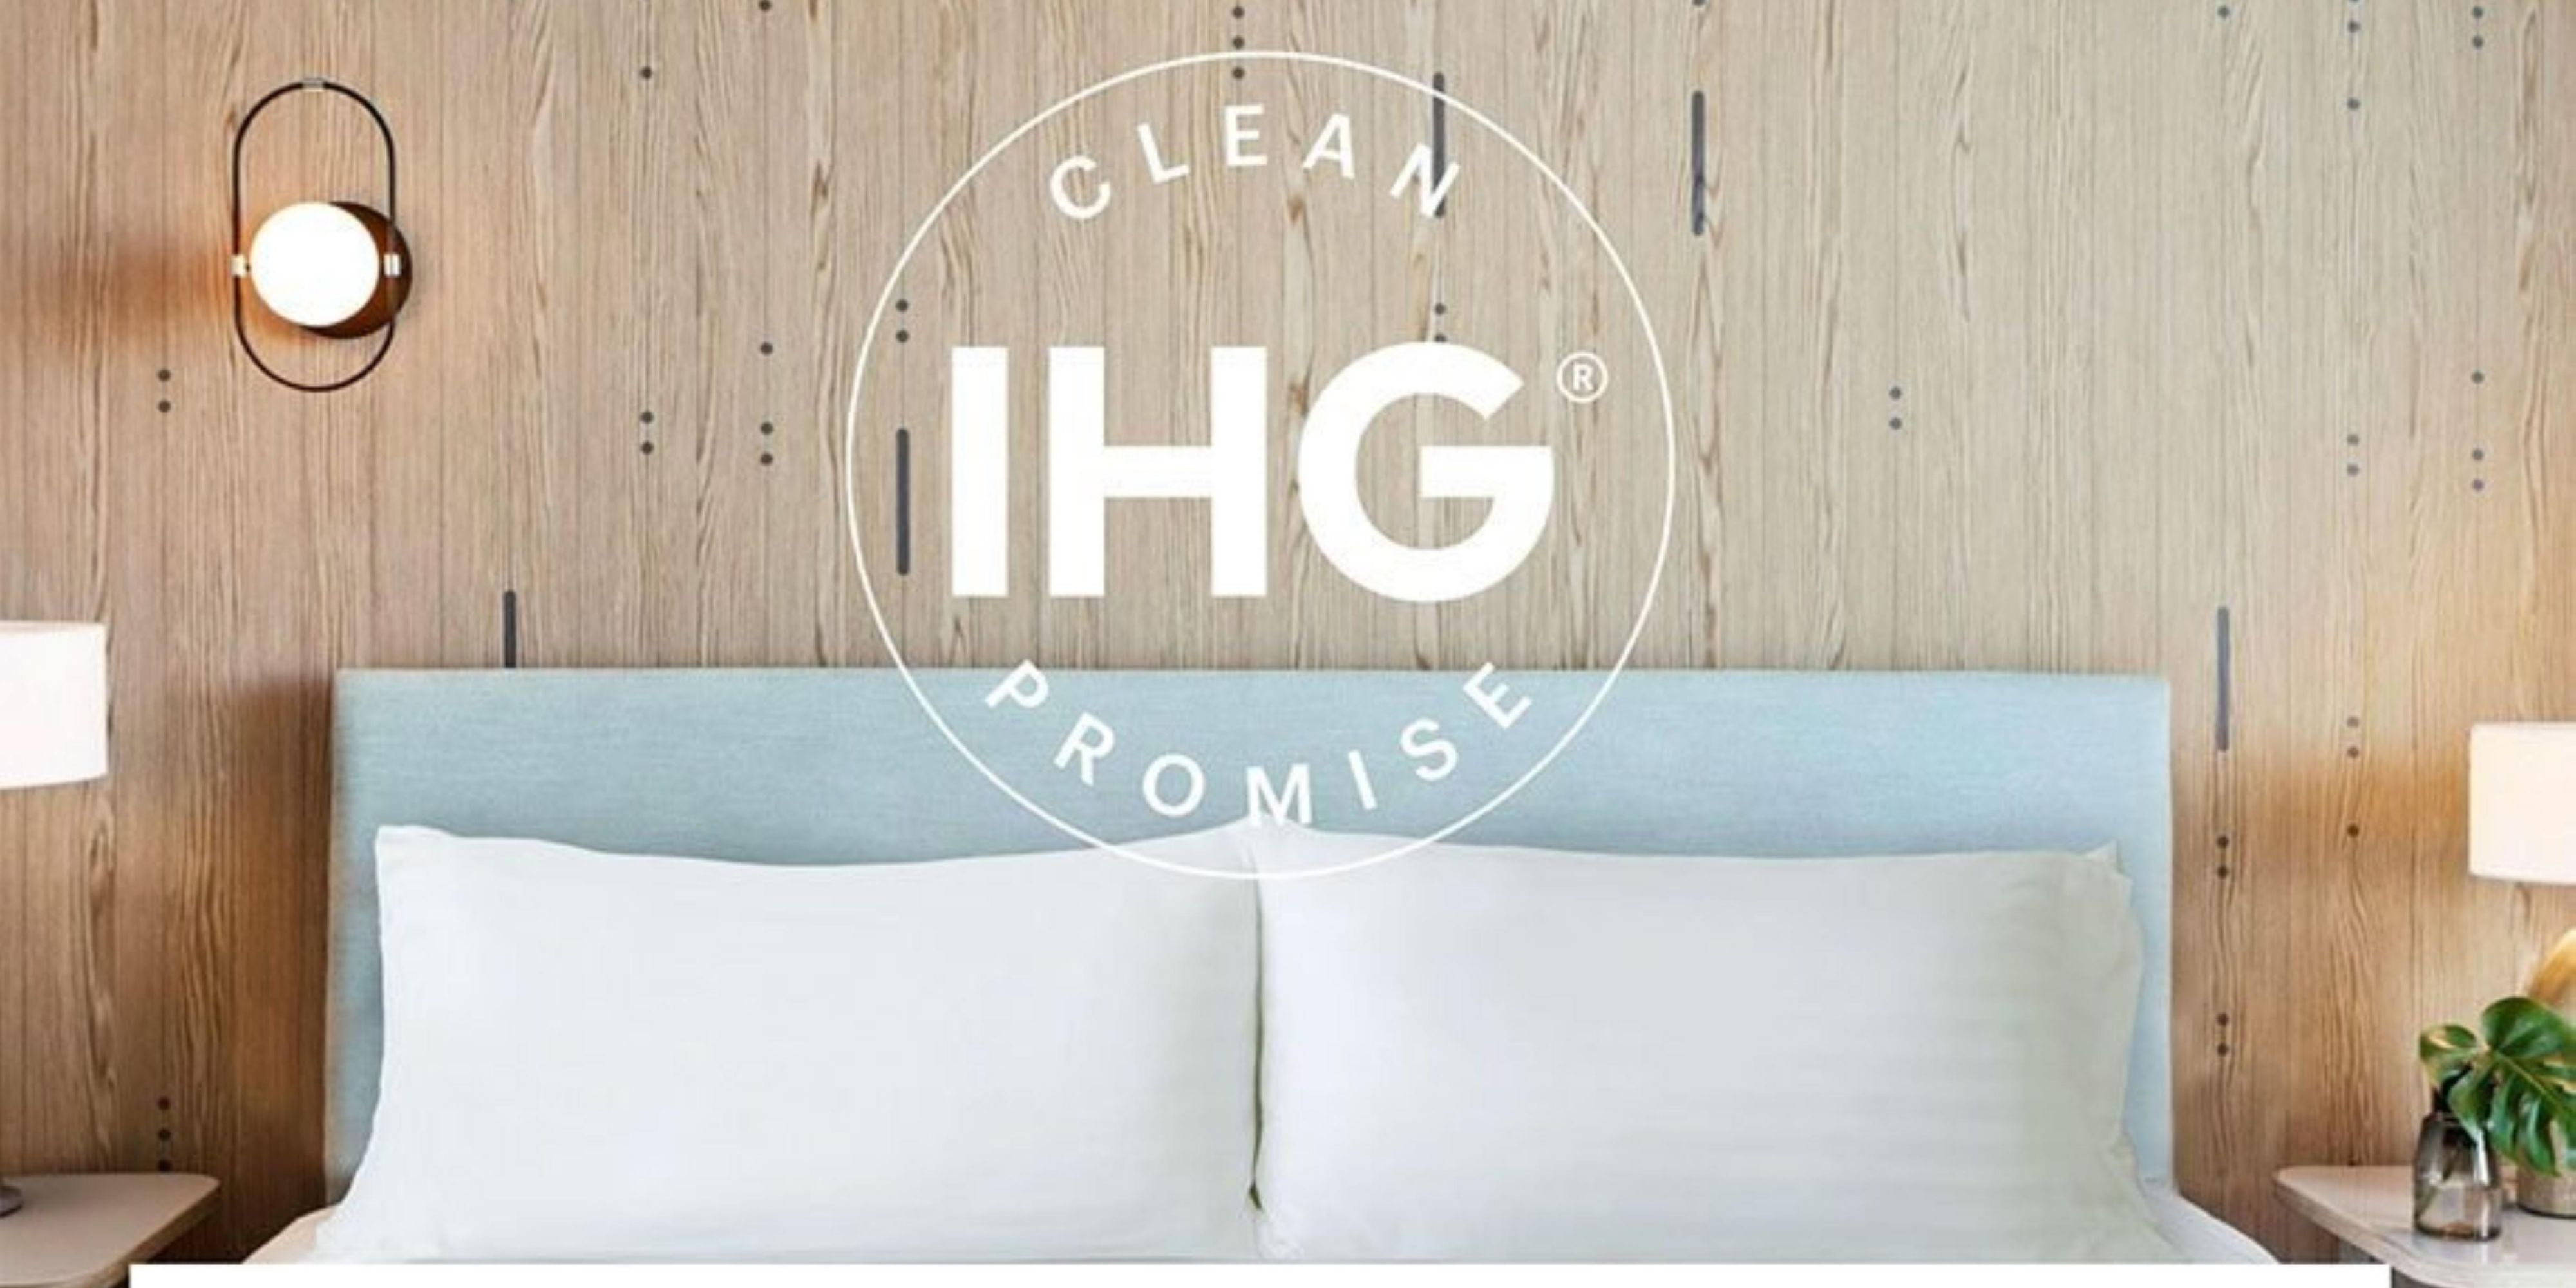 IHG Way of Clean includes deep cleaning with hospital-grade disinfectants, and guests can expect to see evolved procedures throughout the hotel, which may include reduced contact at check-in, touch-less transactions, front desk screens, sanitizer stations, sanitized key-cards, paperless check-out.